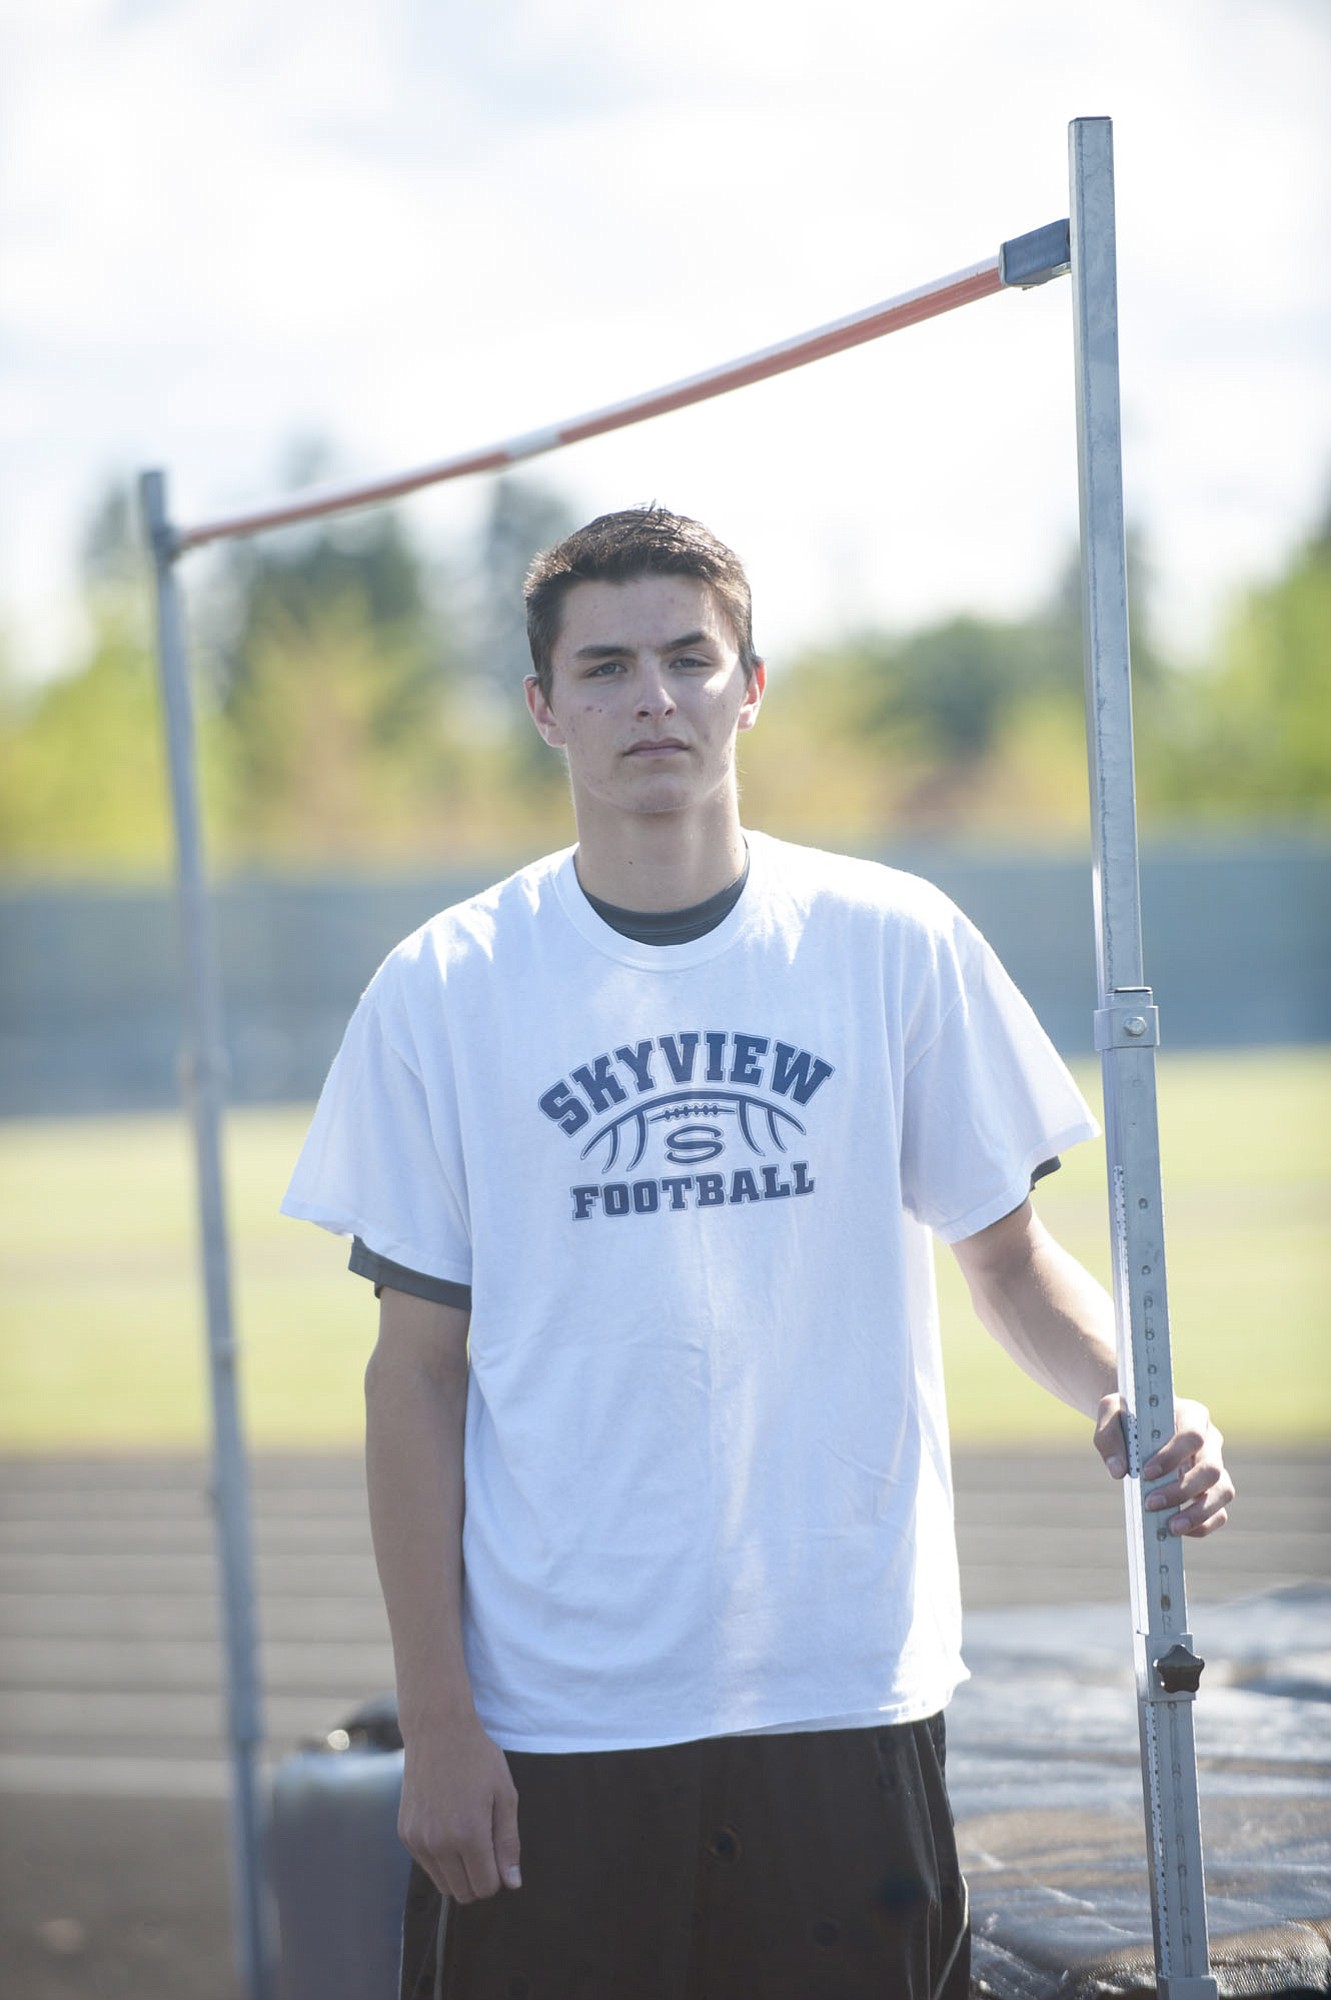 Skyview's Peyton Fredrickson, who stands 6-foot-3, poses under the high jump bar that is set at 6-10, the school-record height he cleared earlier this season.